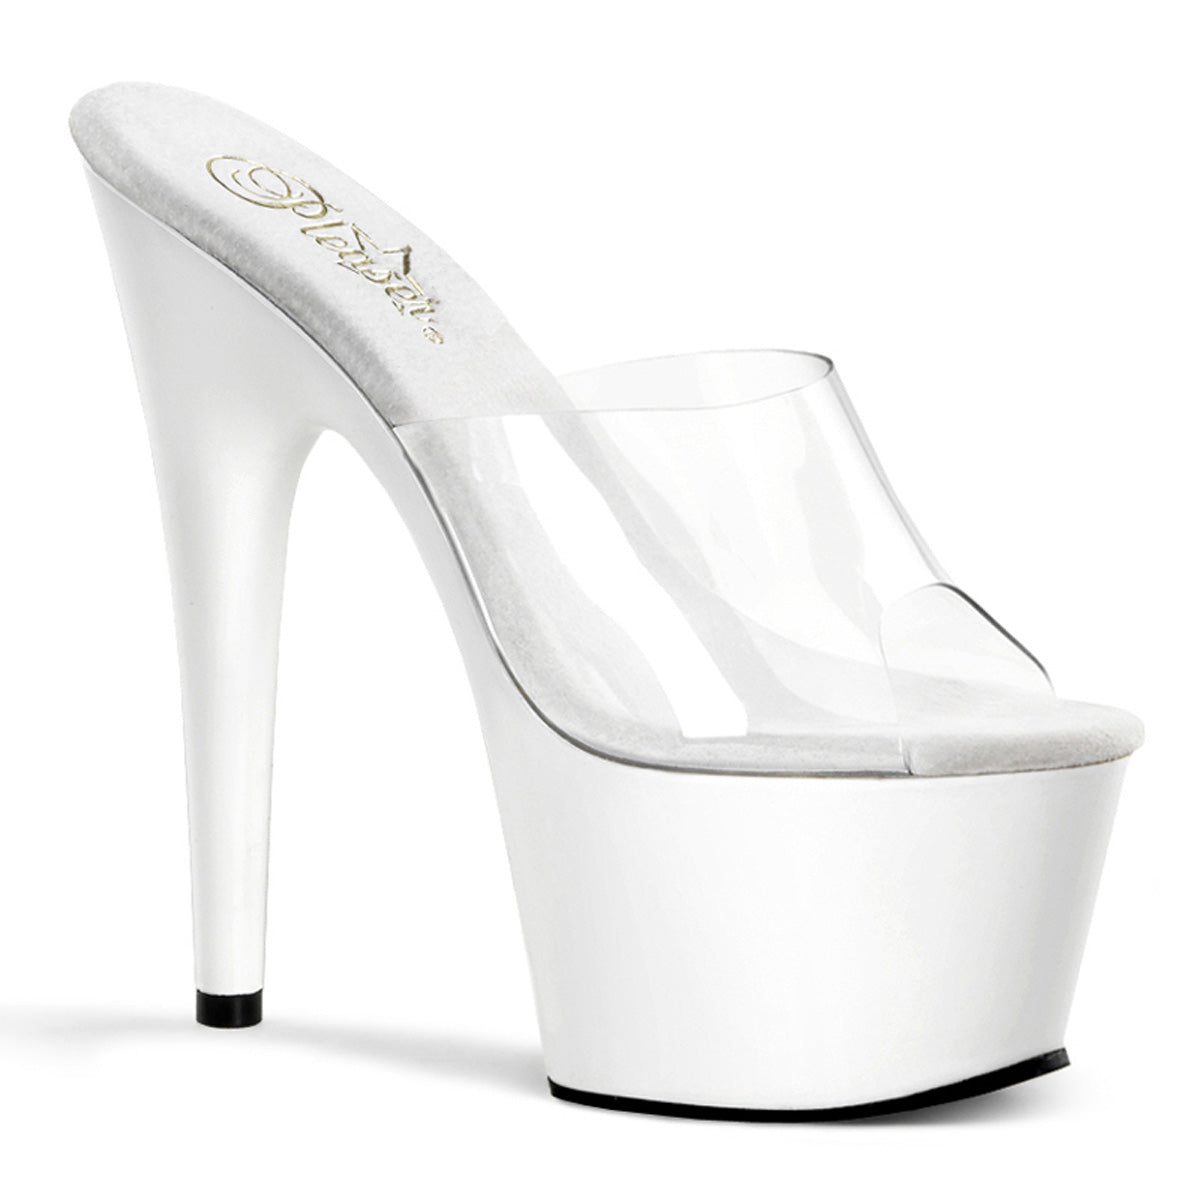 ADORE-701 Sexy 7 Inch Heel Clear and White Pole Dancing Slip On Sandals